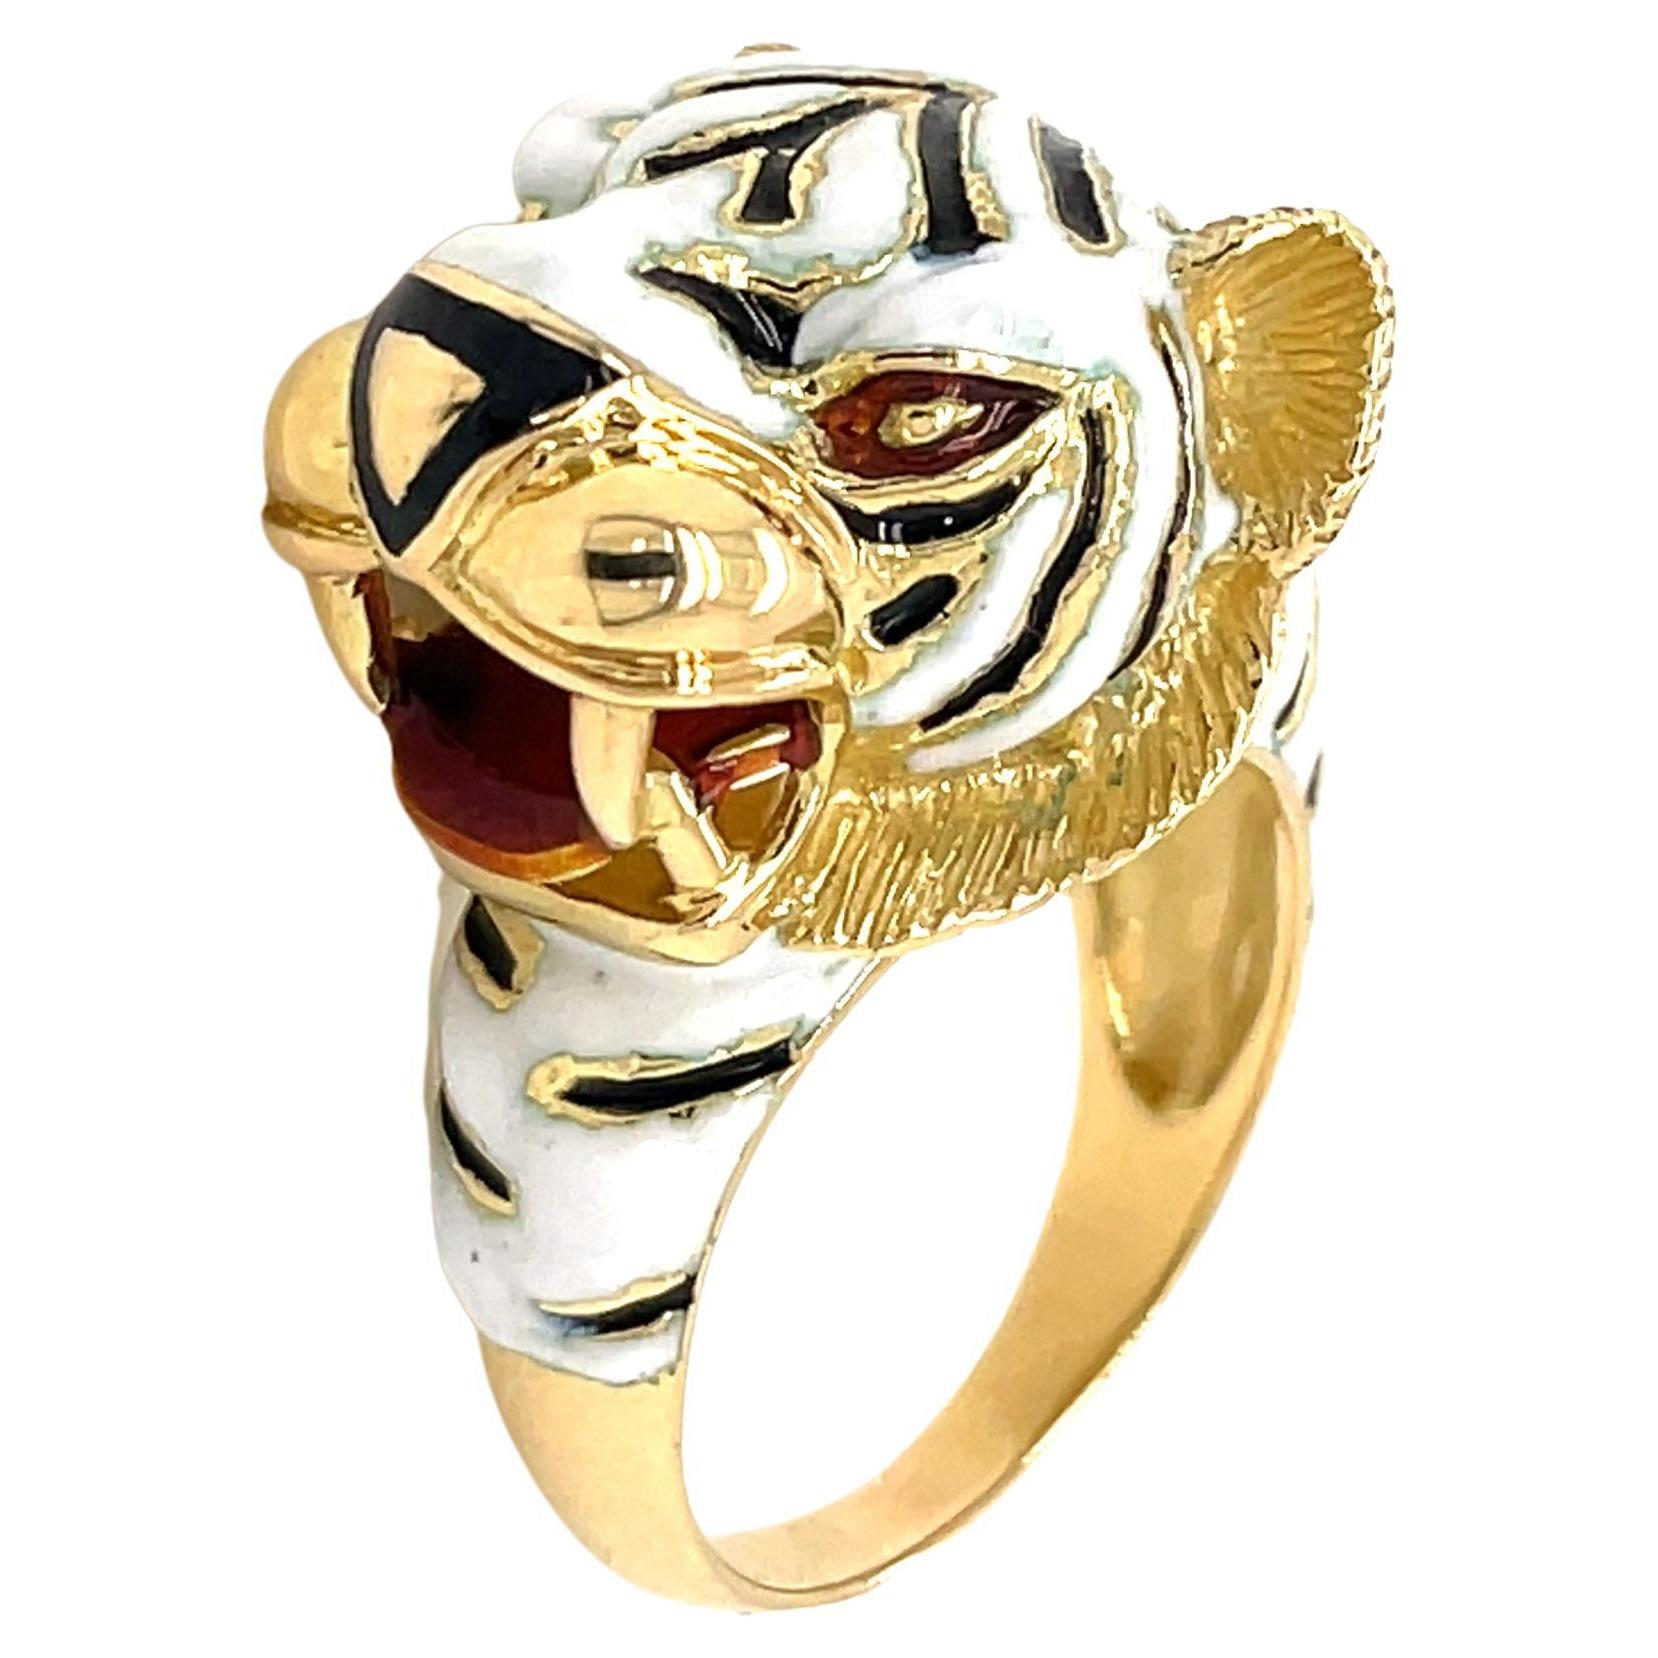 An iconic 18kt yellow gold ring by northern Italian master Frascarolo, representing a white Bengala Tiger, decorated with fine black, white and red enamel. Made in Italy, circa 1975.
The ring measures a size 6 1/2.
Hallmarks: 465 AL, 750.
Gross